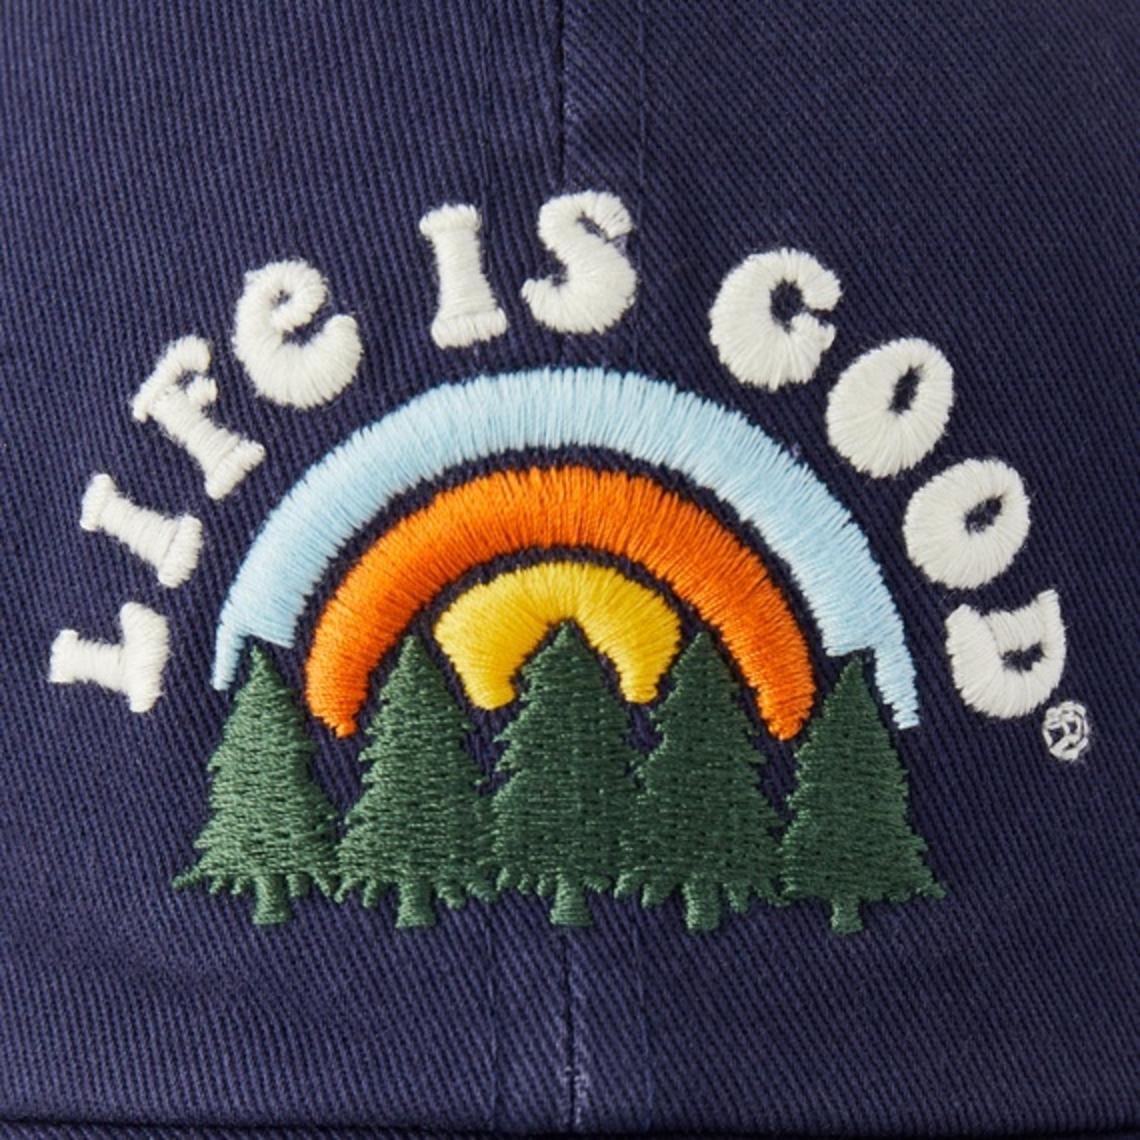 Life Is Good Rainbow Forest Chill Cap